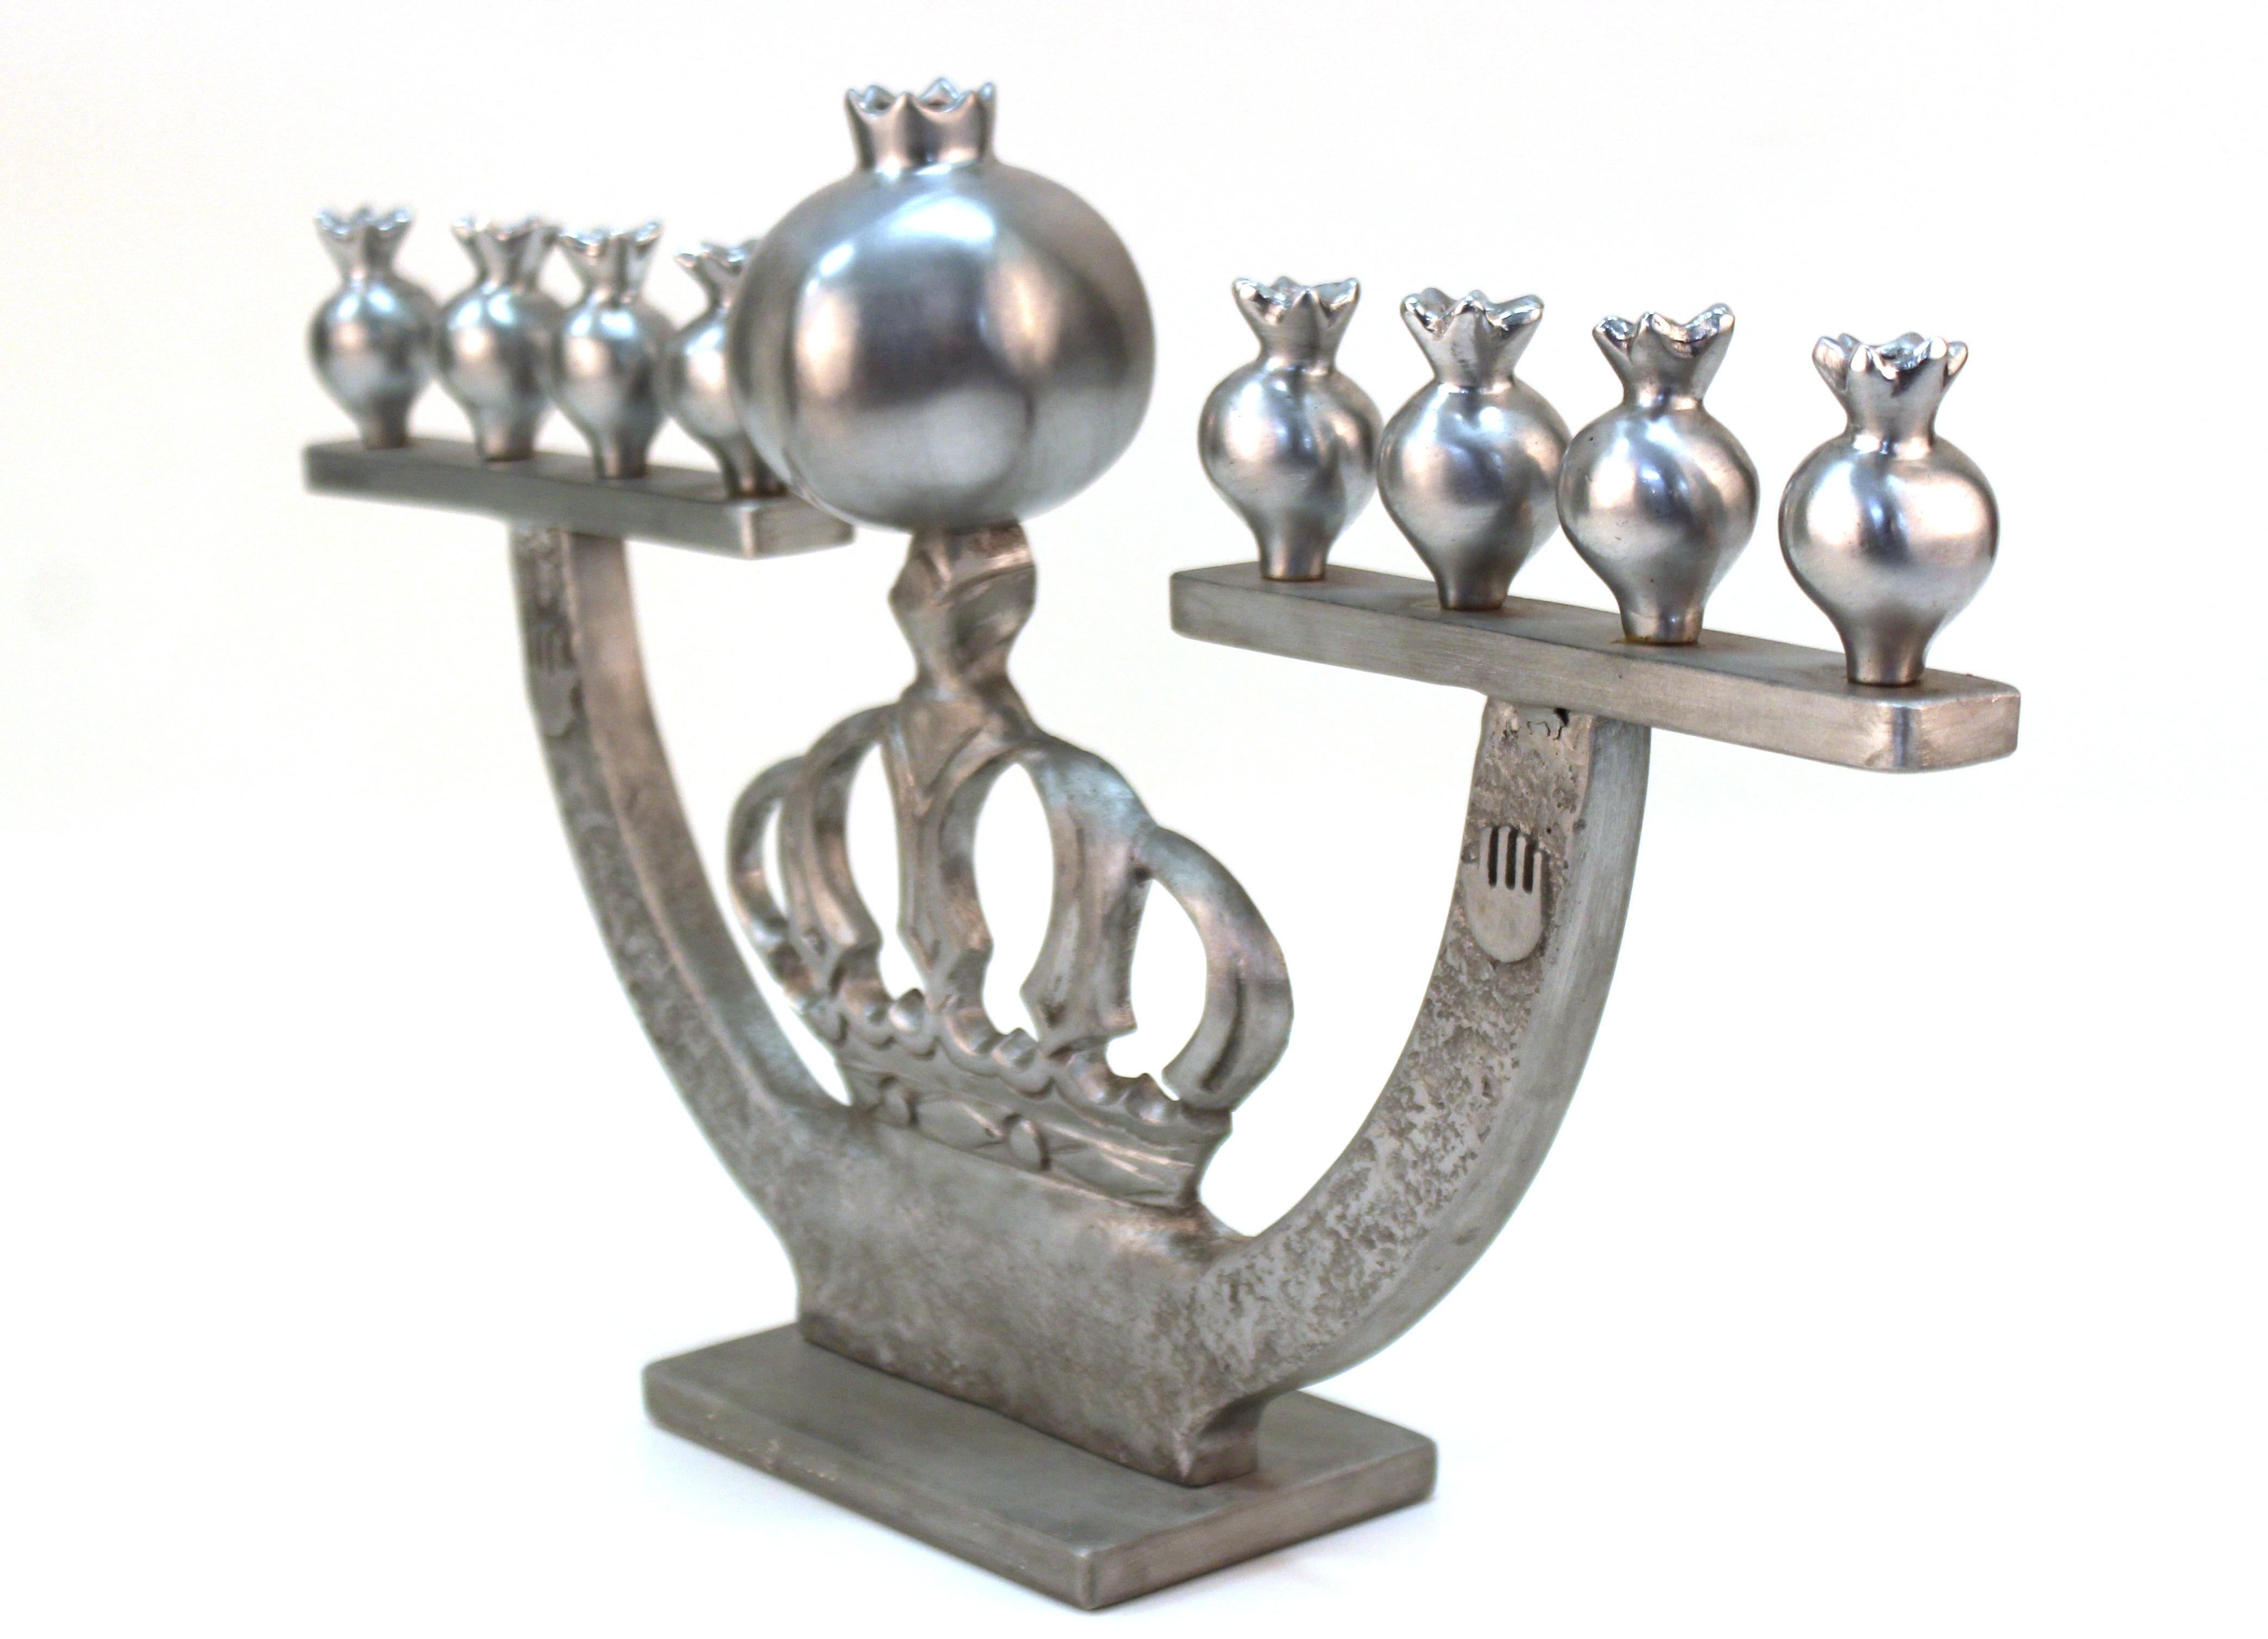 Modern cast aluminum menorah by Oded Halahmy, created in 2006. Marked by the artist and dated on the side. In great vintage condition.